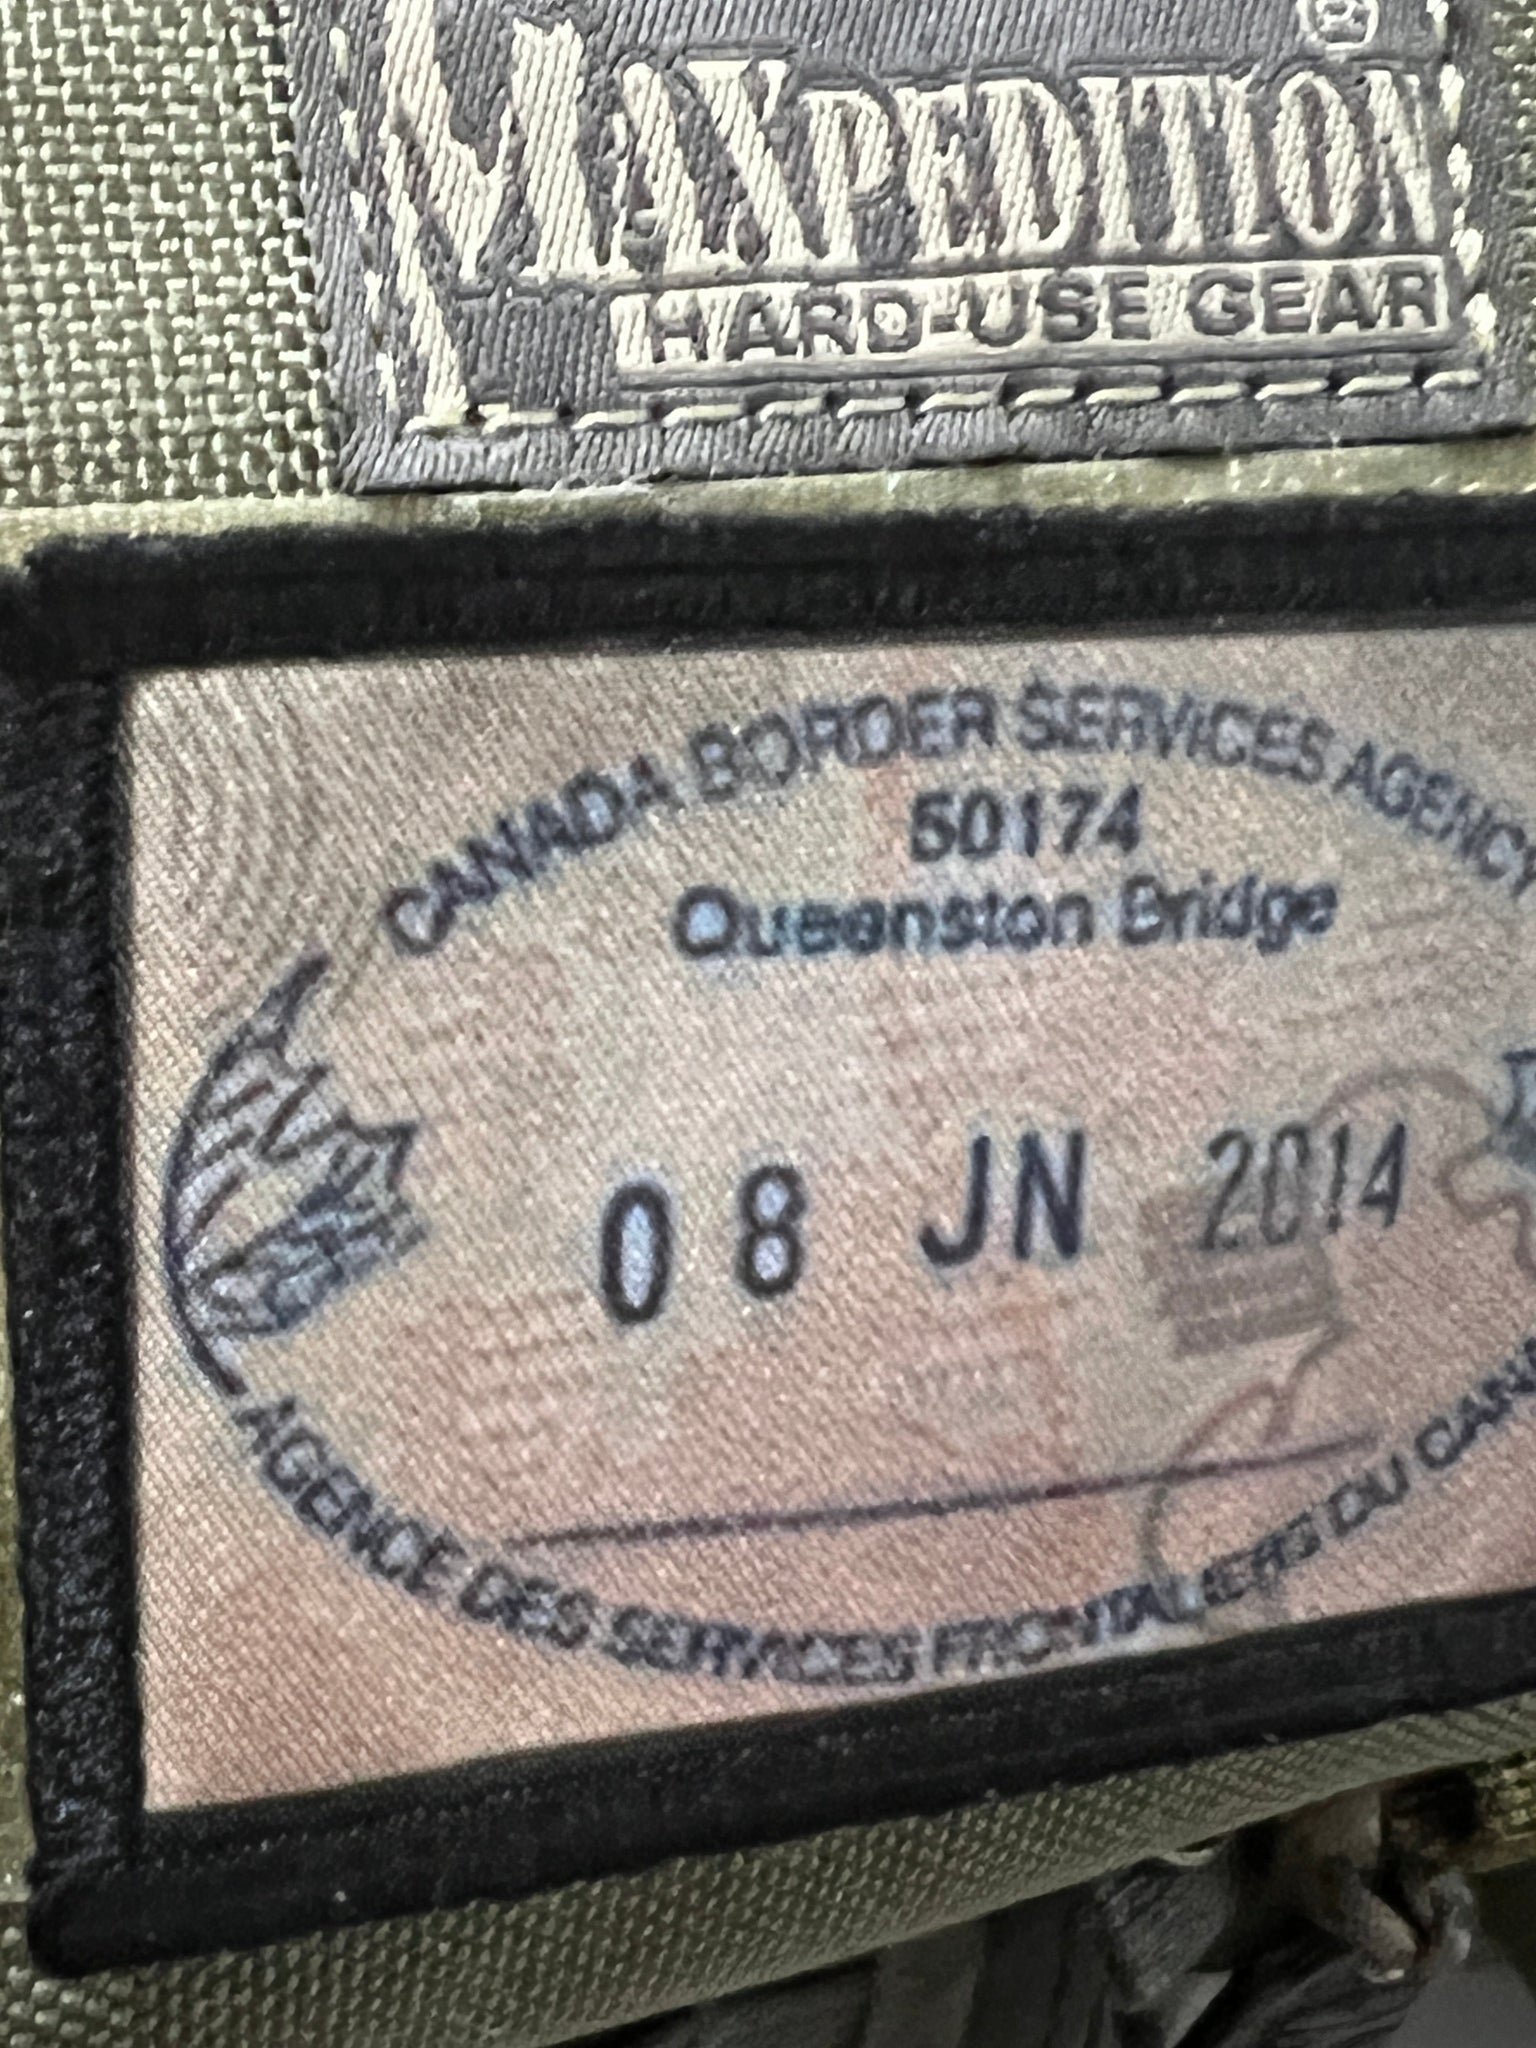 Canada Passport Stamp Morale Patch 2x3